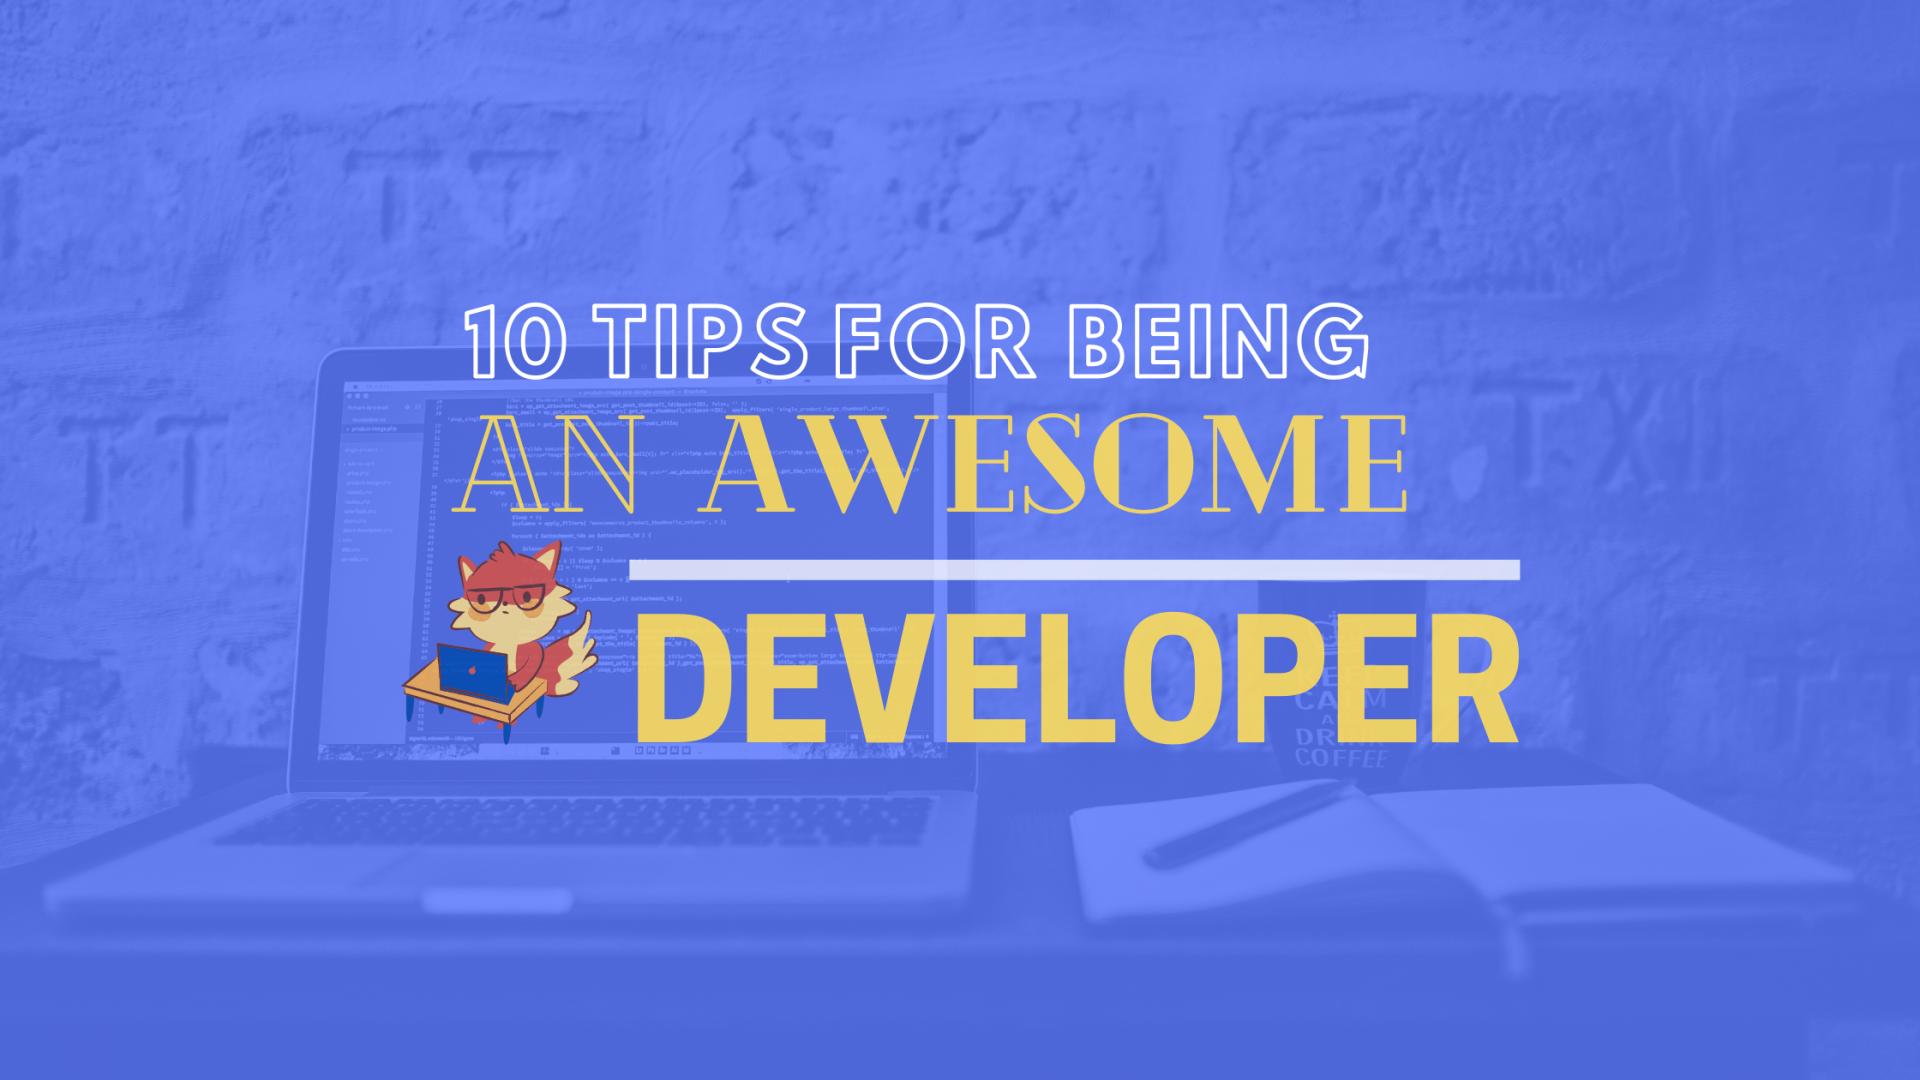 10 Tips for Being an Awesome Developer